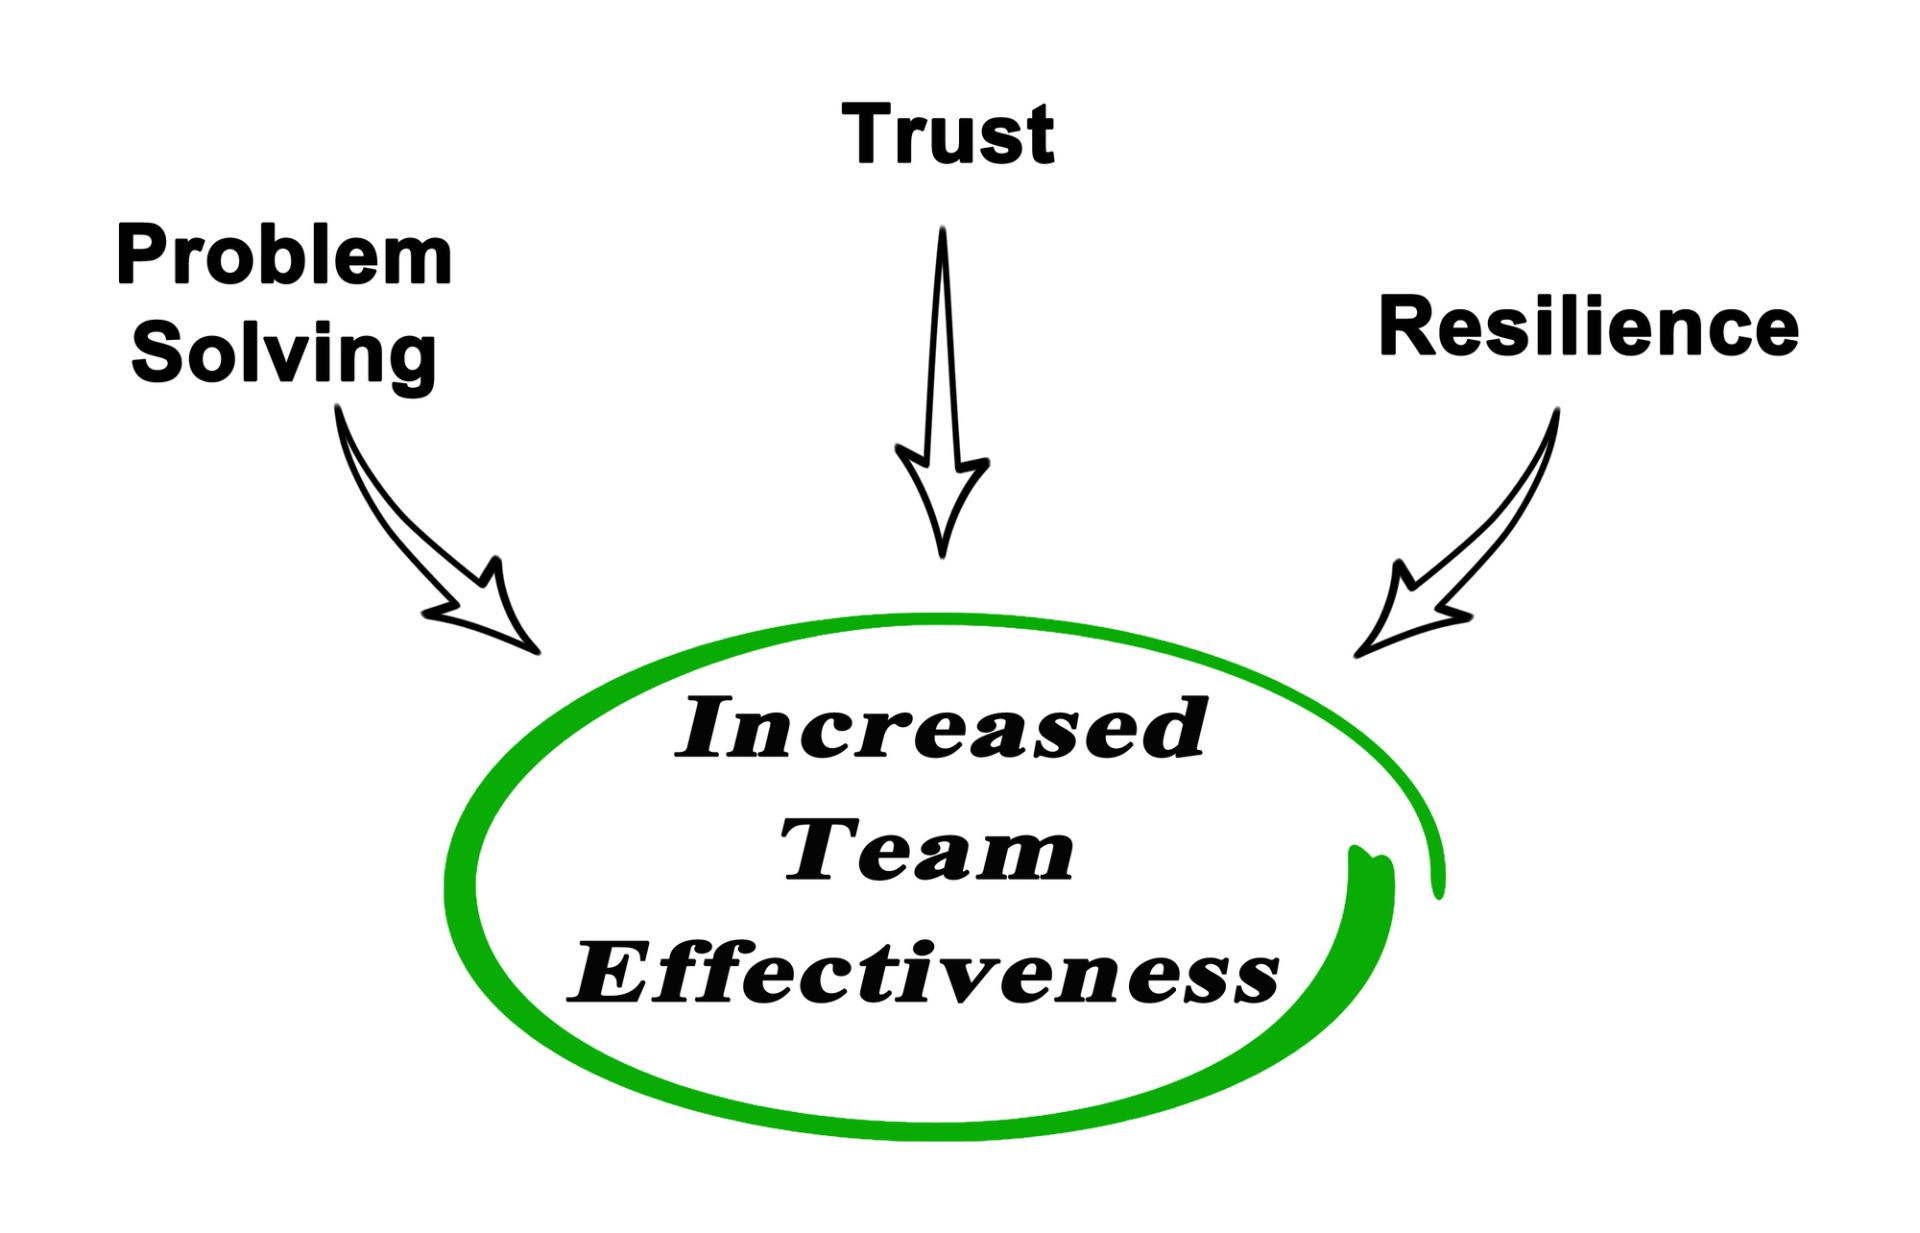 Trust building and resilience